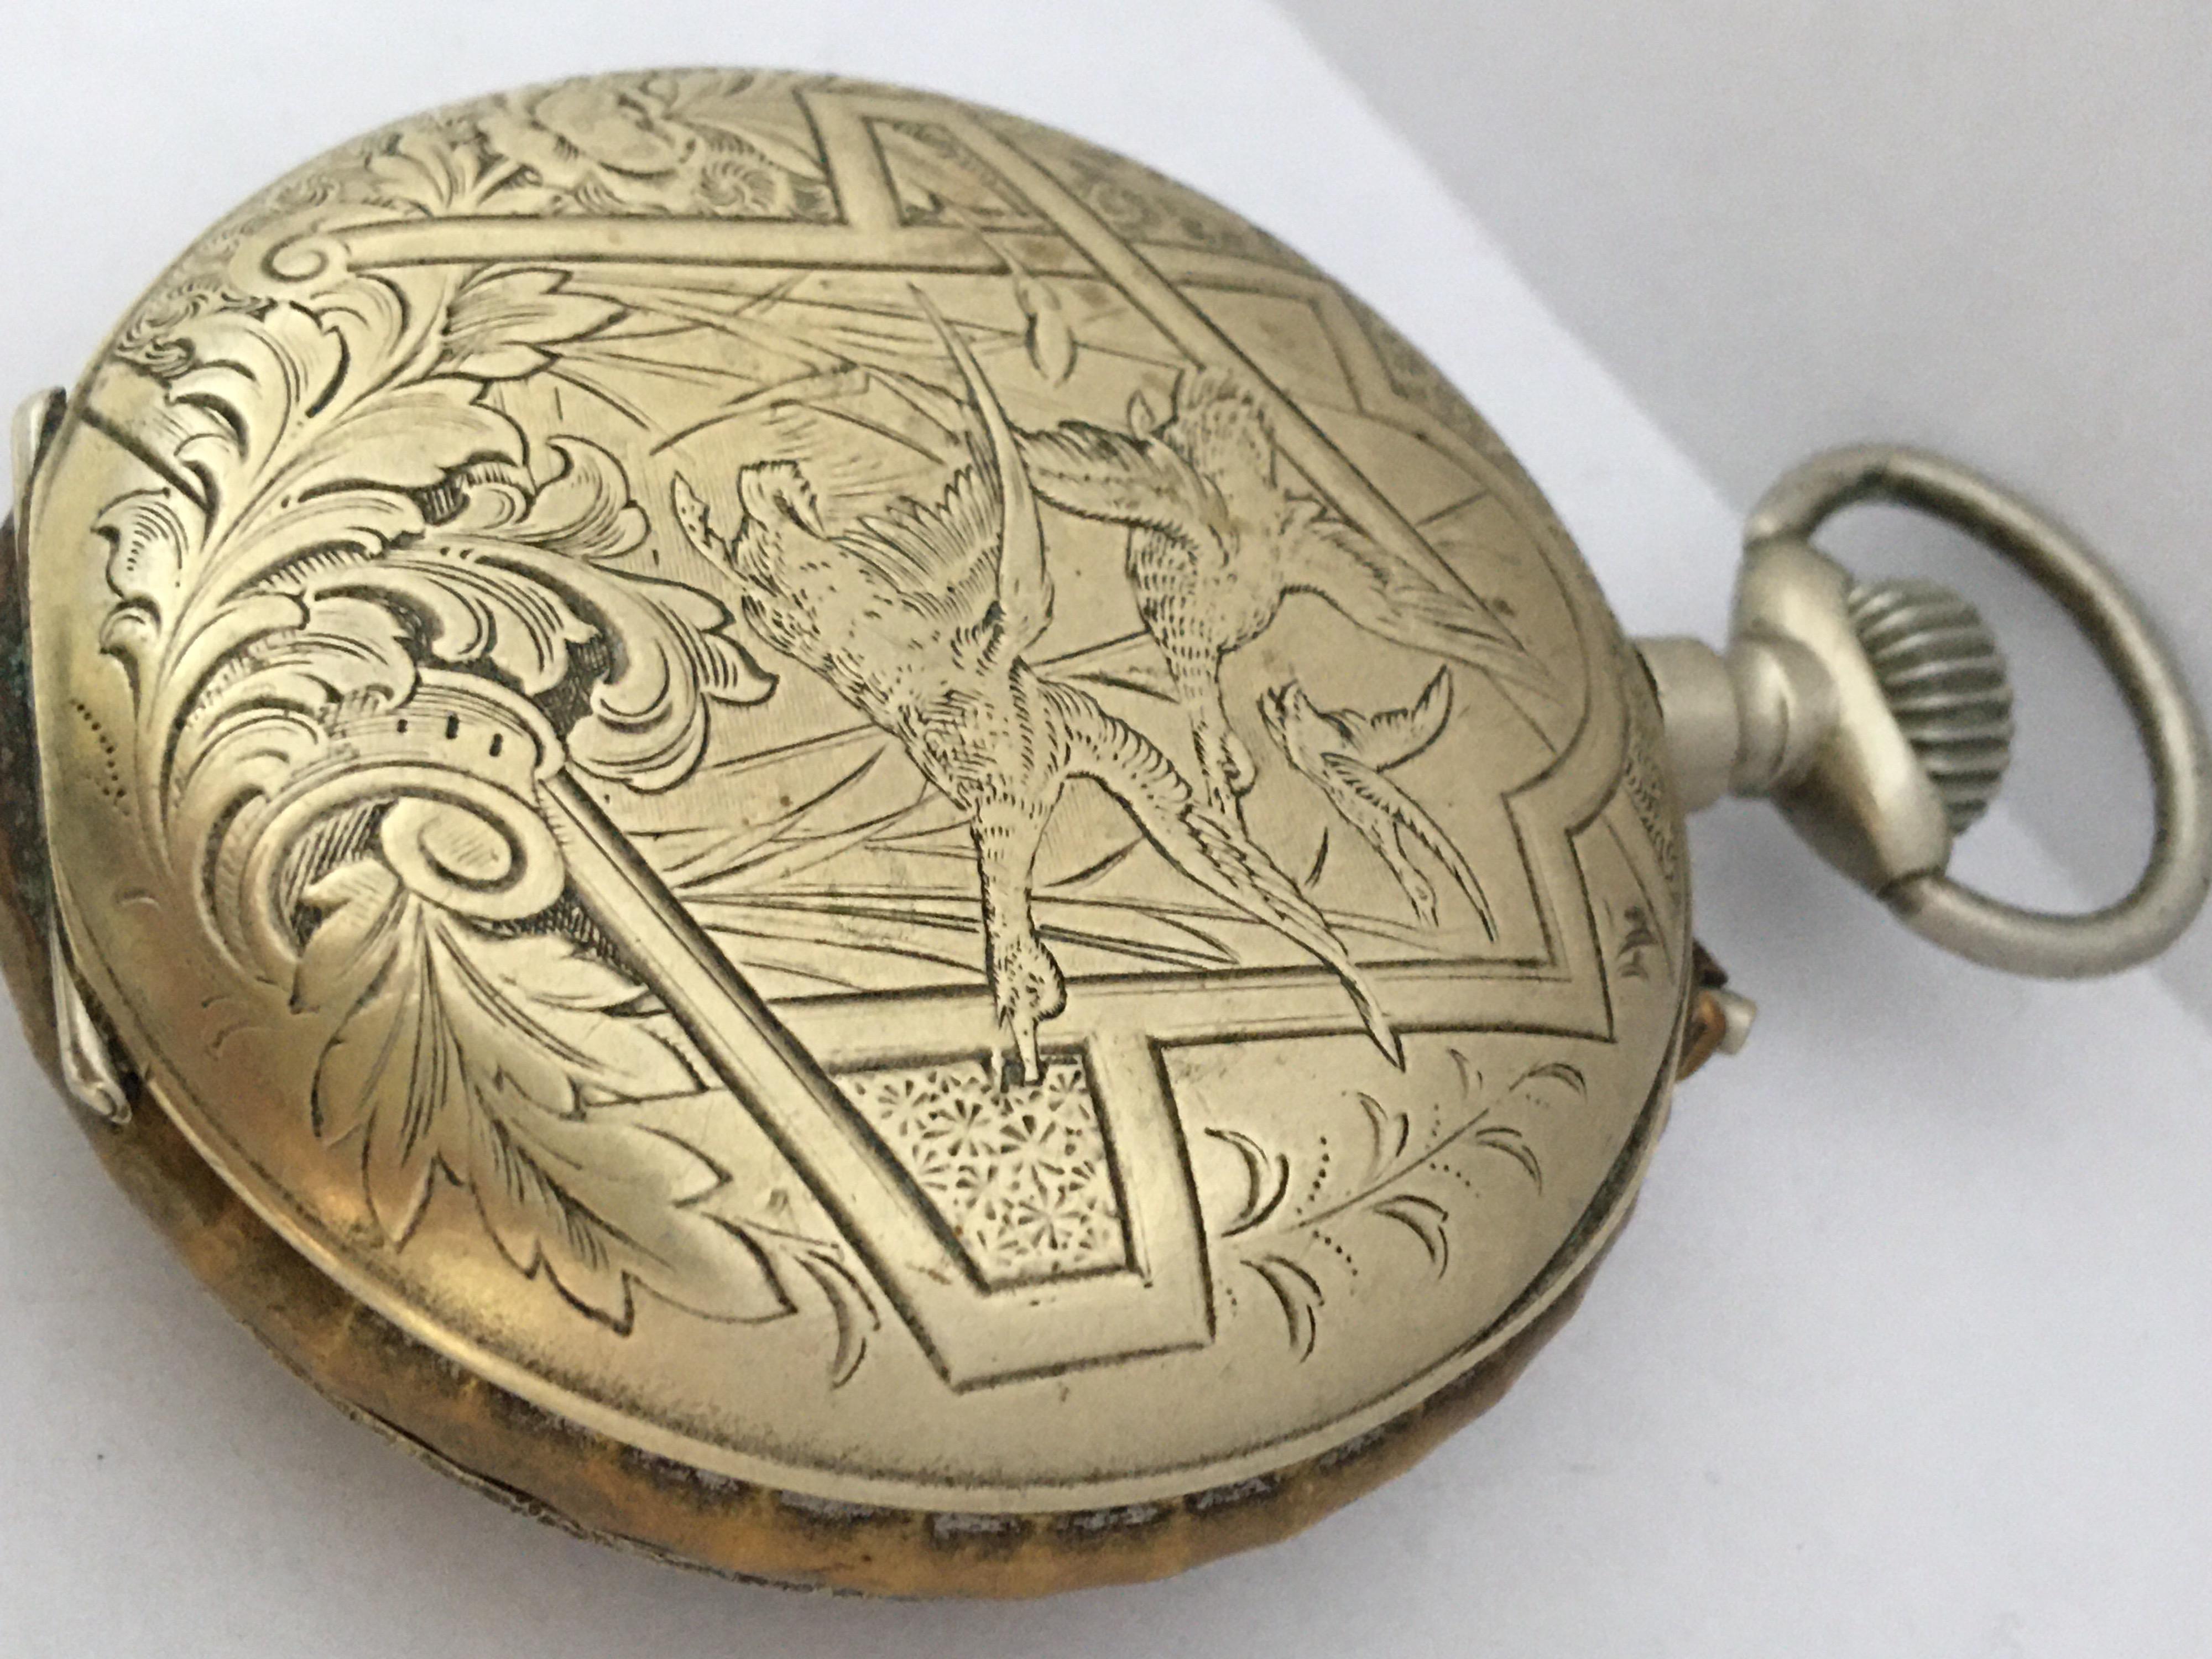 Antique Beautifully Engraved Hand Winding Pocket Watch with Roskopf Escapement For Sale 7